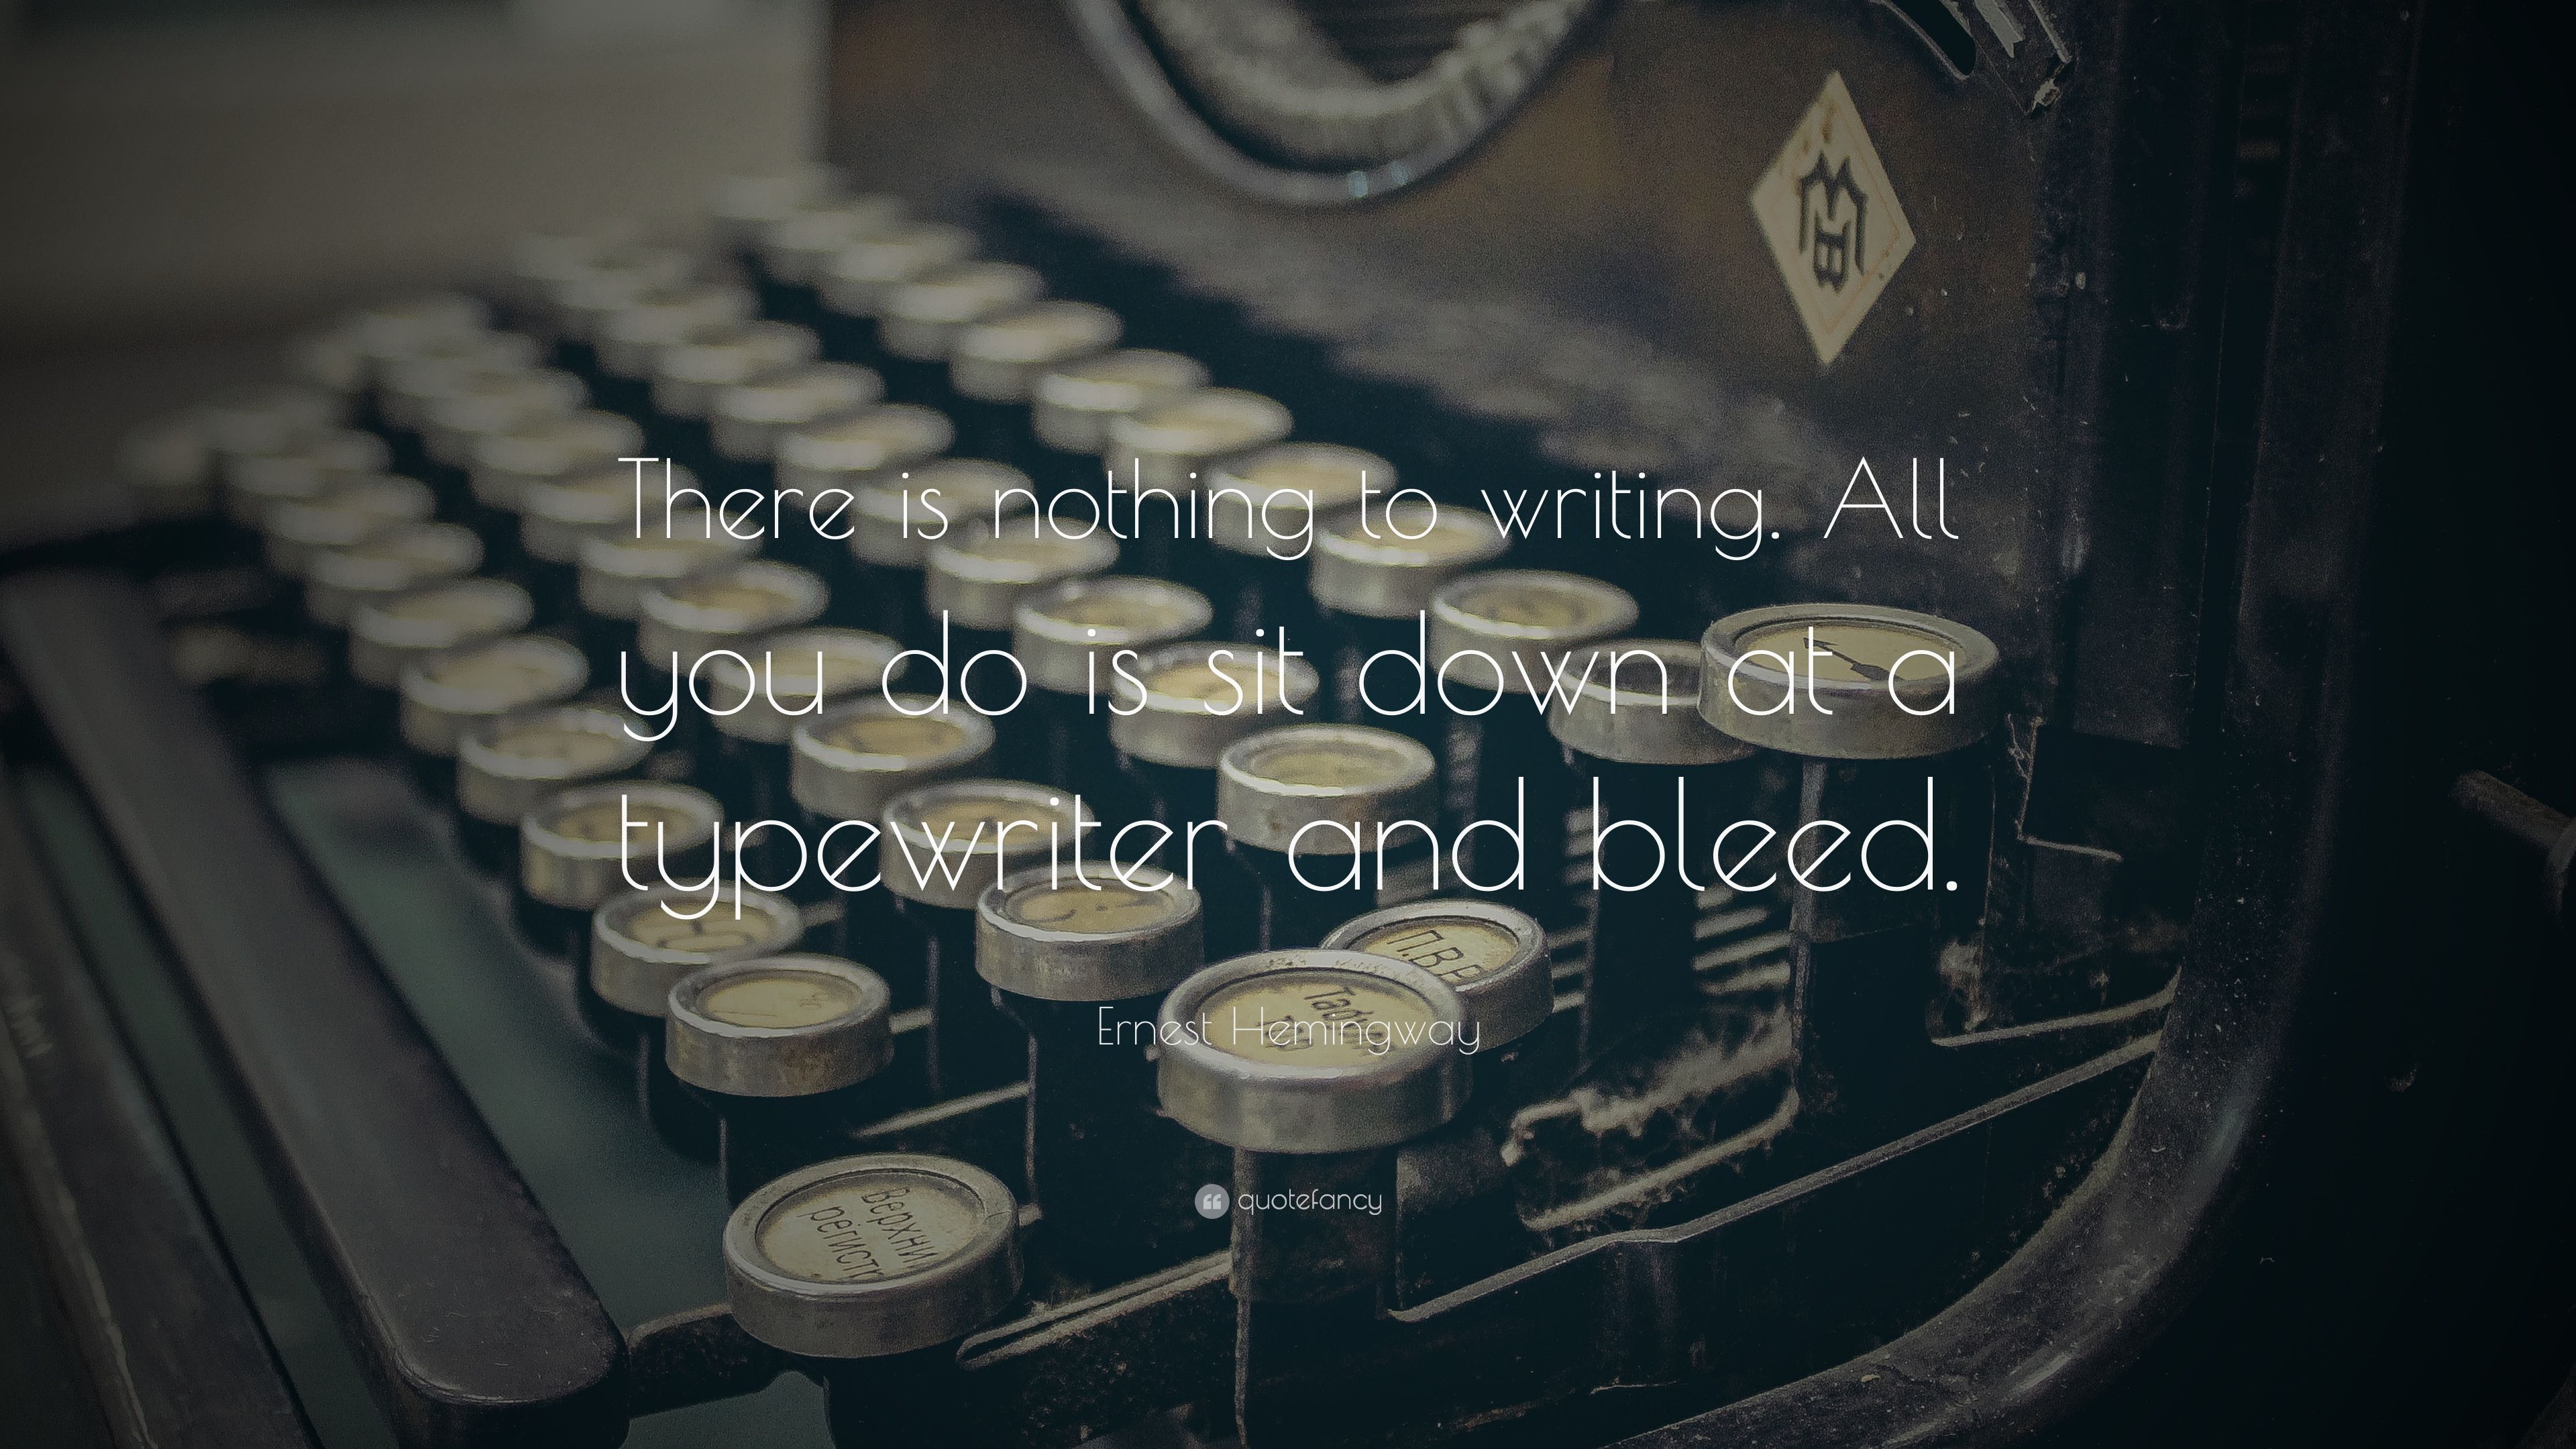 Ernest Hemingway Quote: “There is nothing to writing. All you do